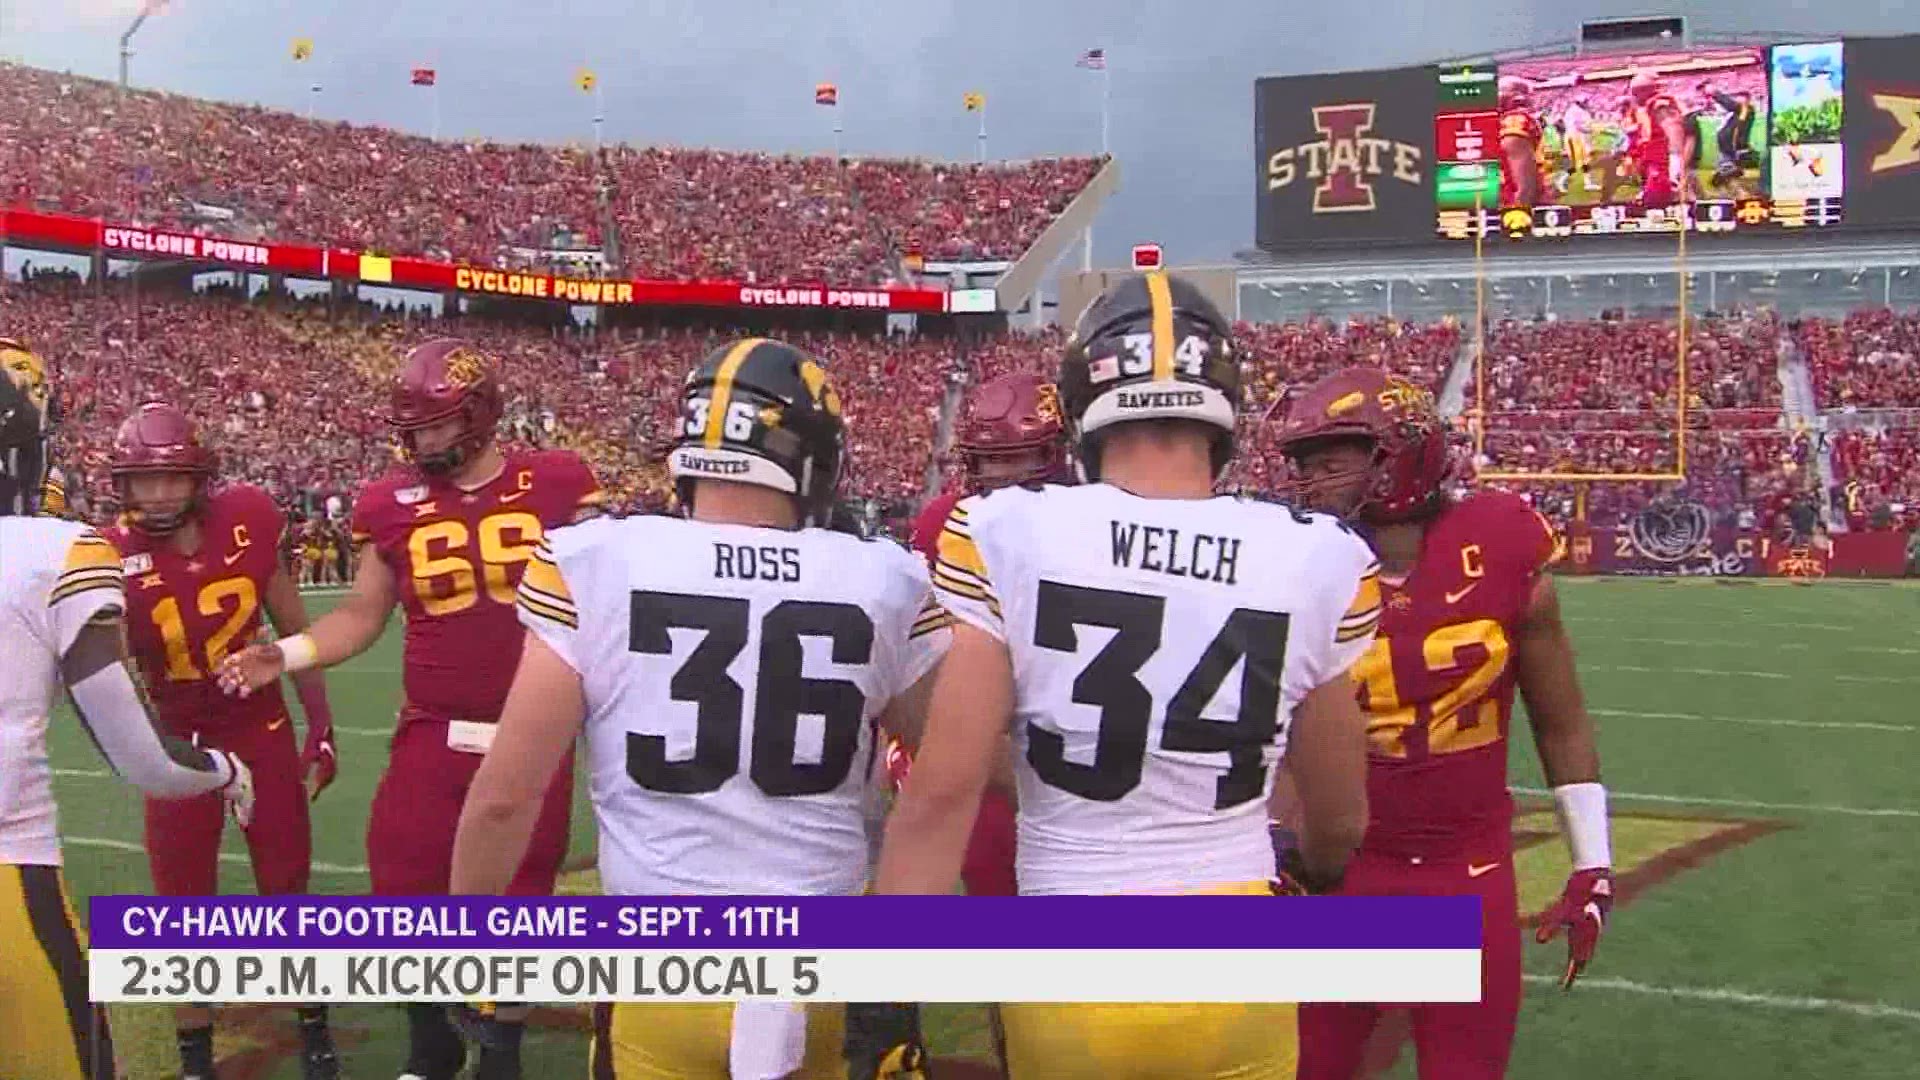 The Hawkeyes will visit the Cyclones at 2:30 p.m. on Sept. 11 on Local 5.